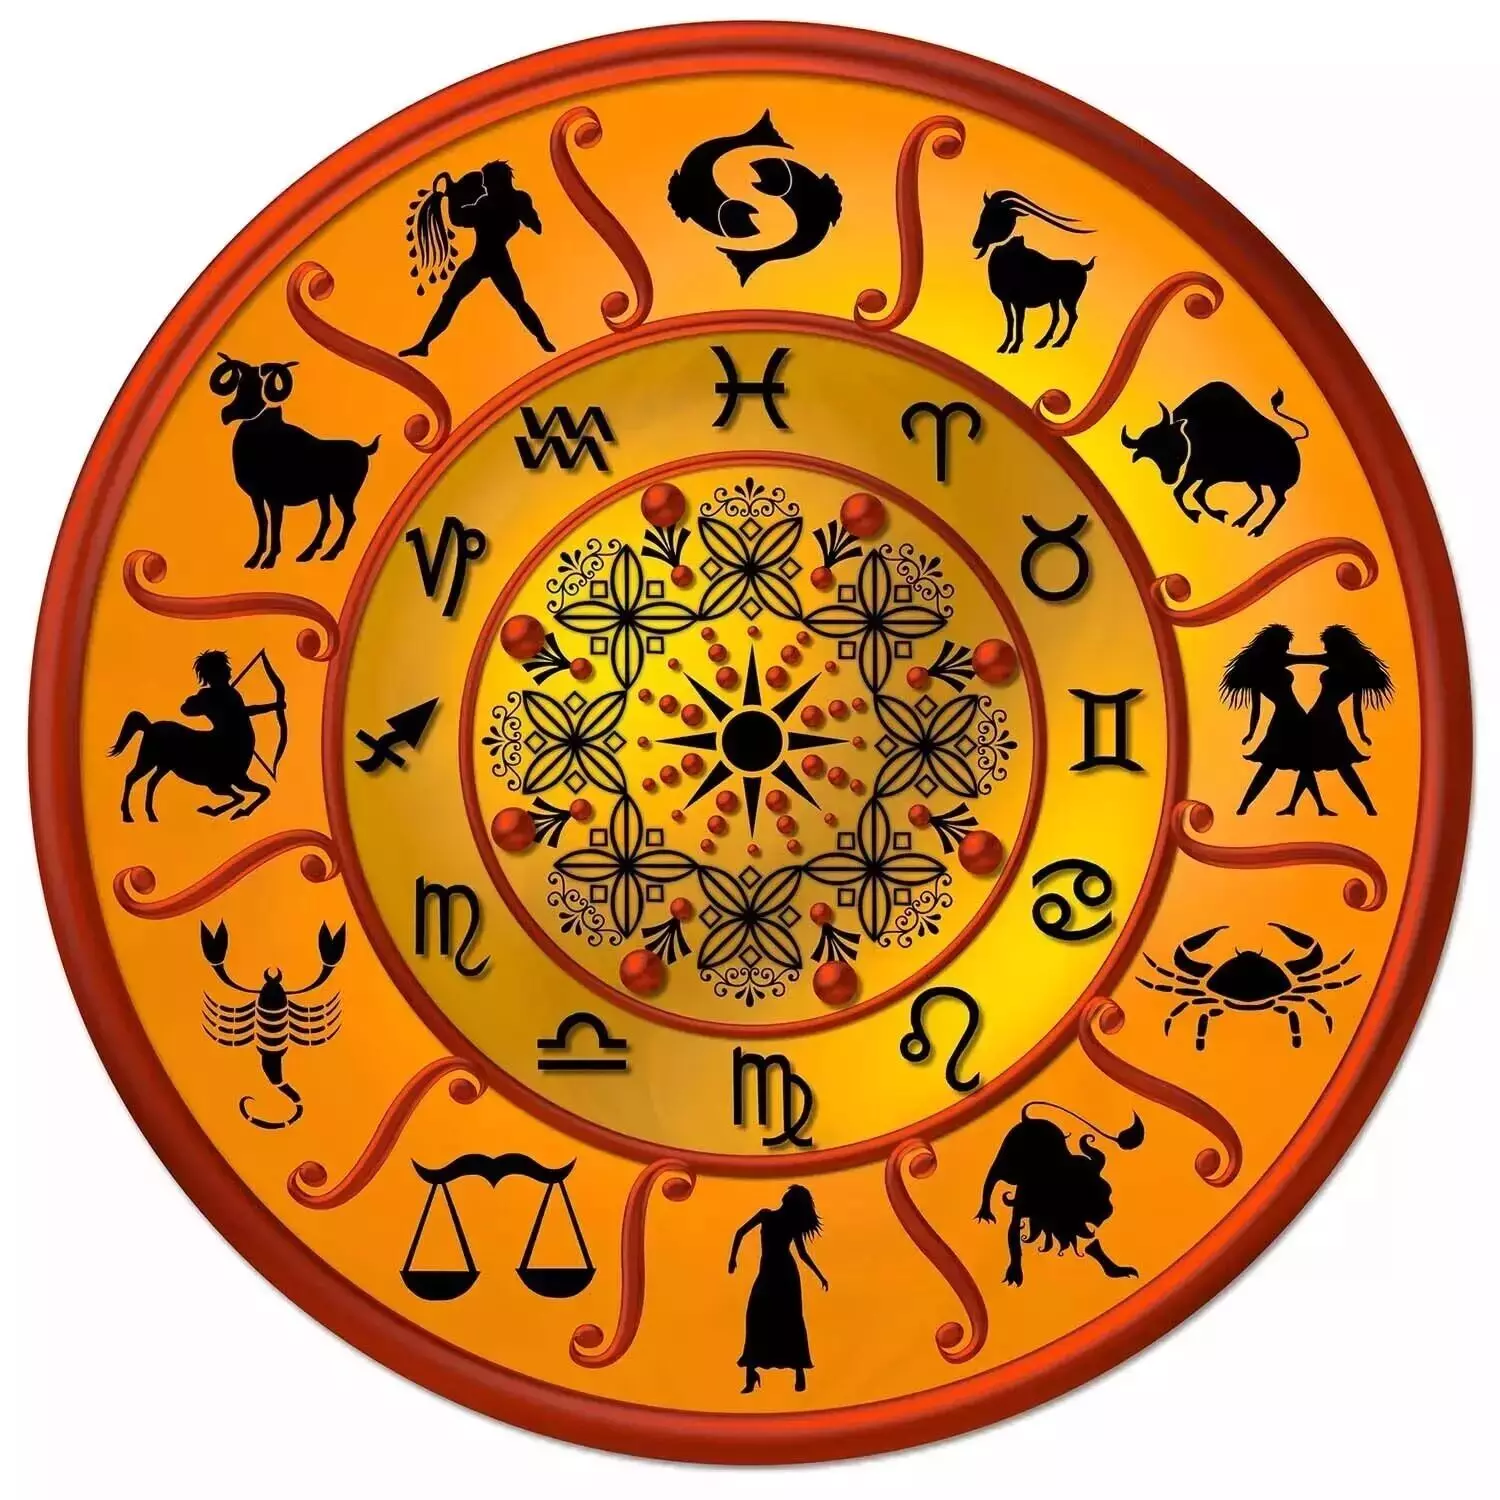 06 October – Know your todays horoscope